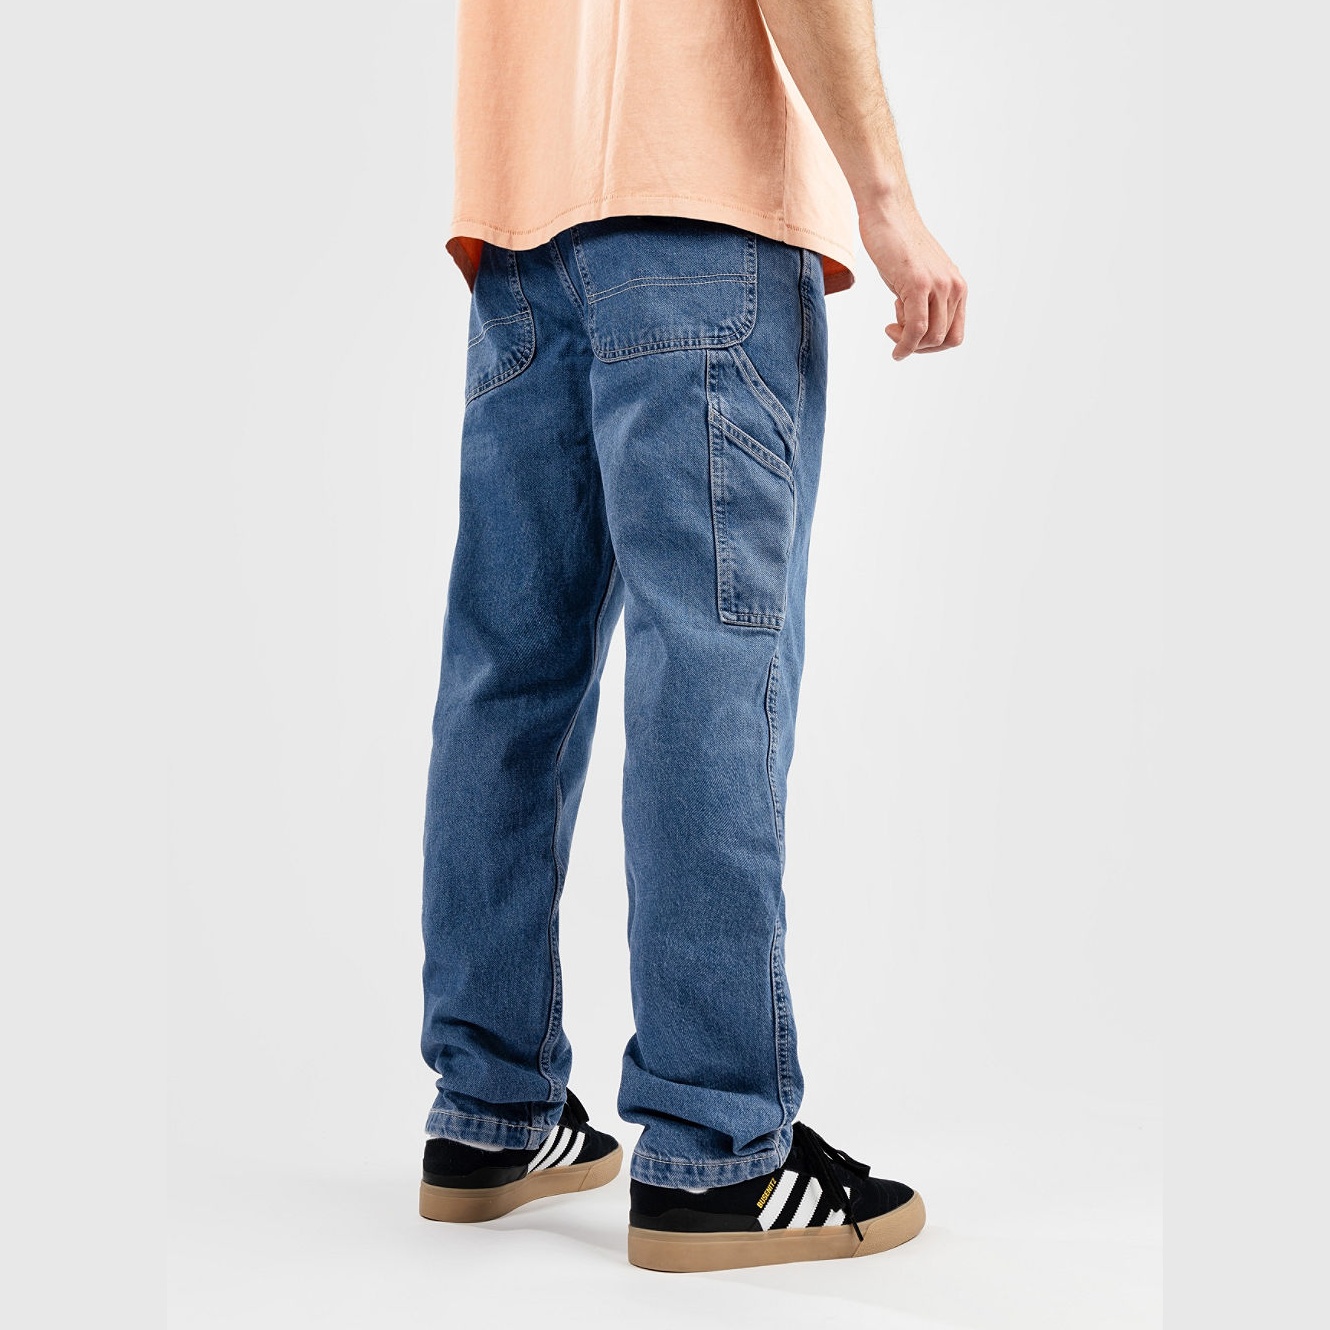 Dickies Garyville Denim Classic Blue Jeans Homme